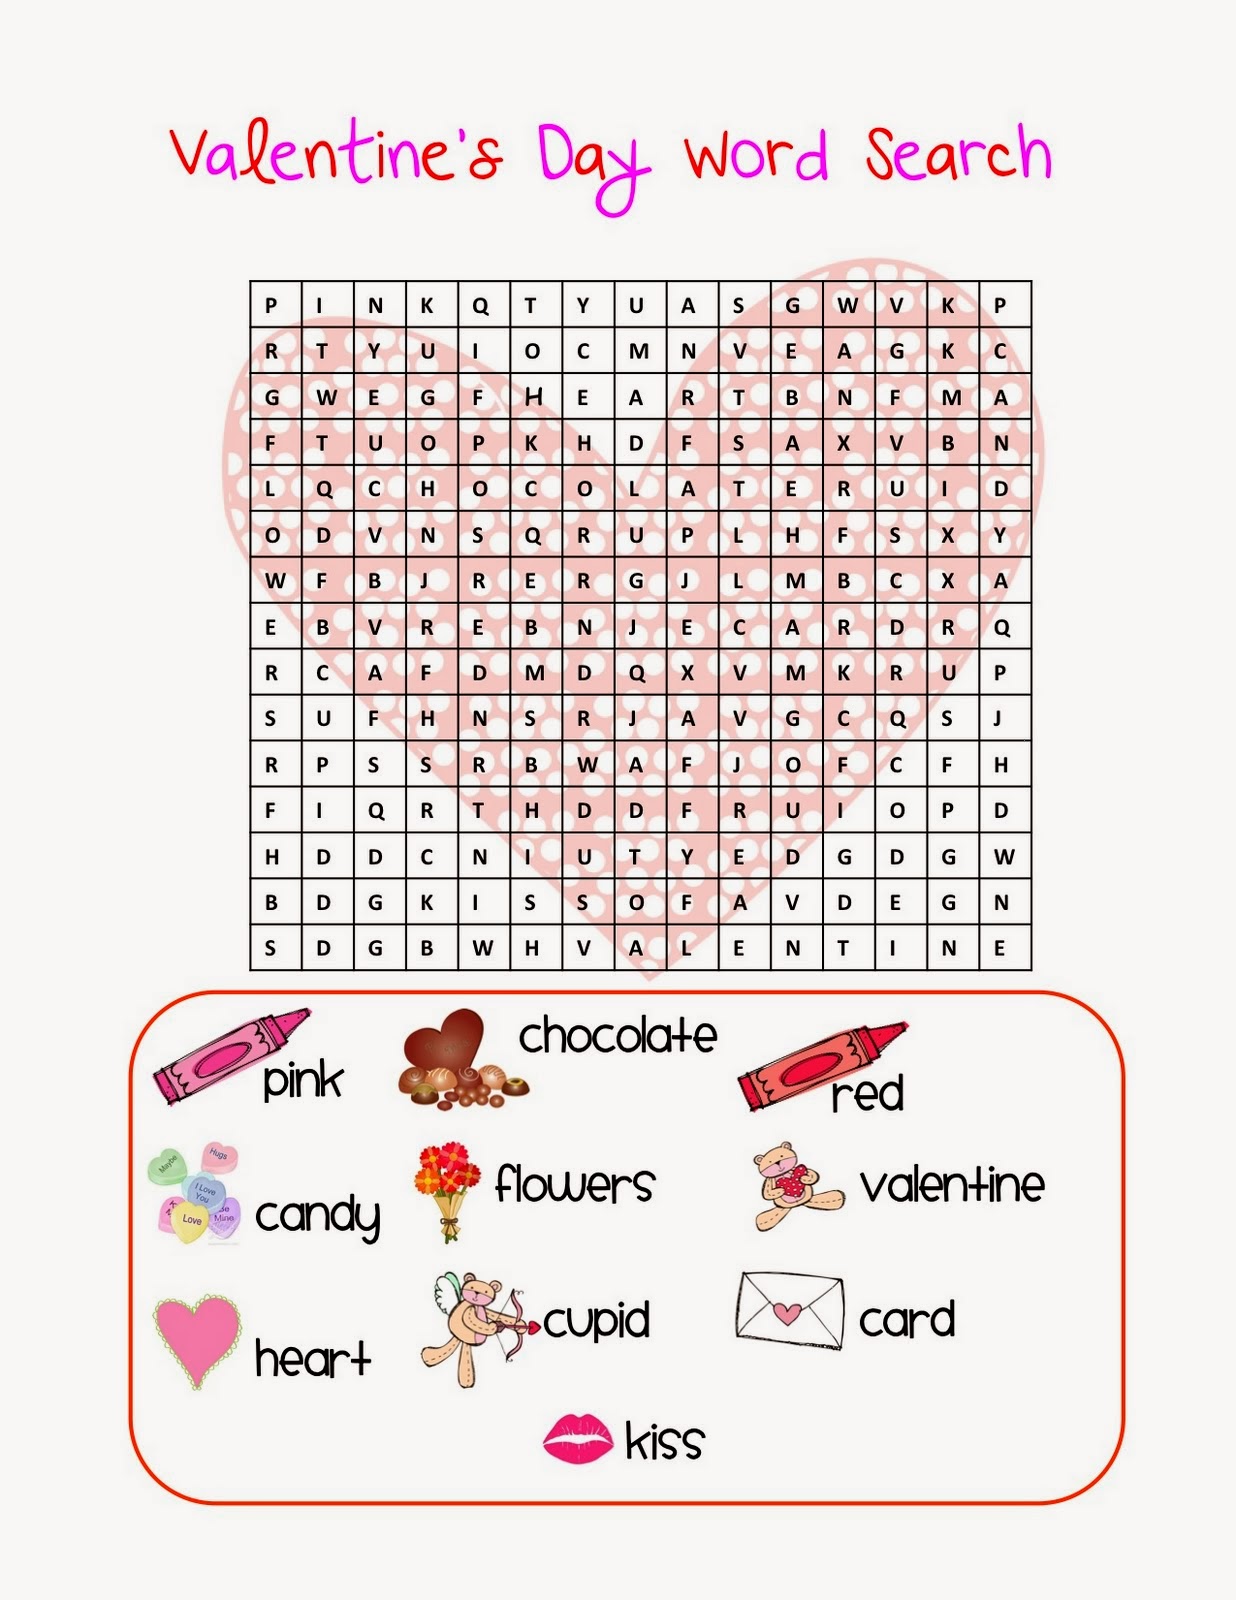 Valentines Word Search Games1236 x 1600